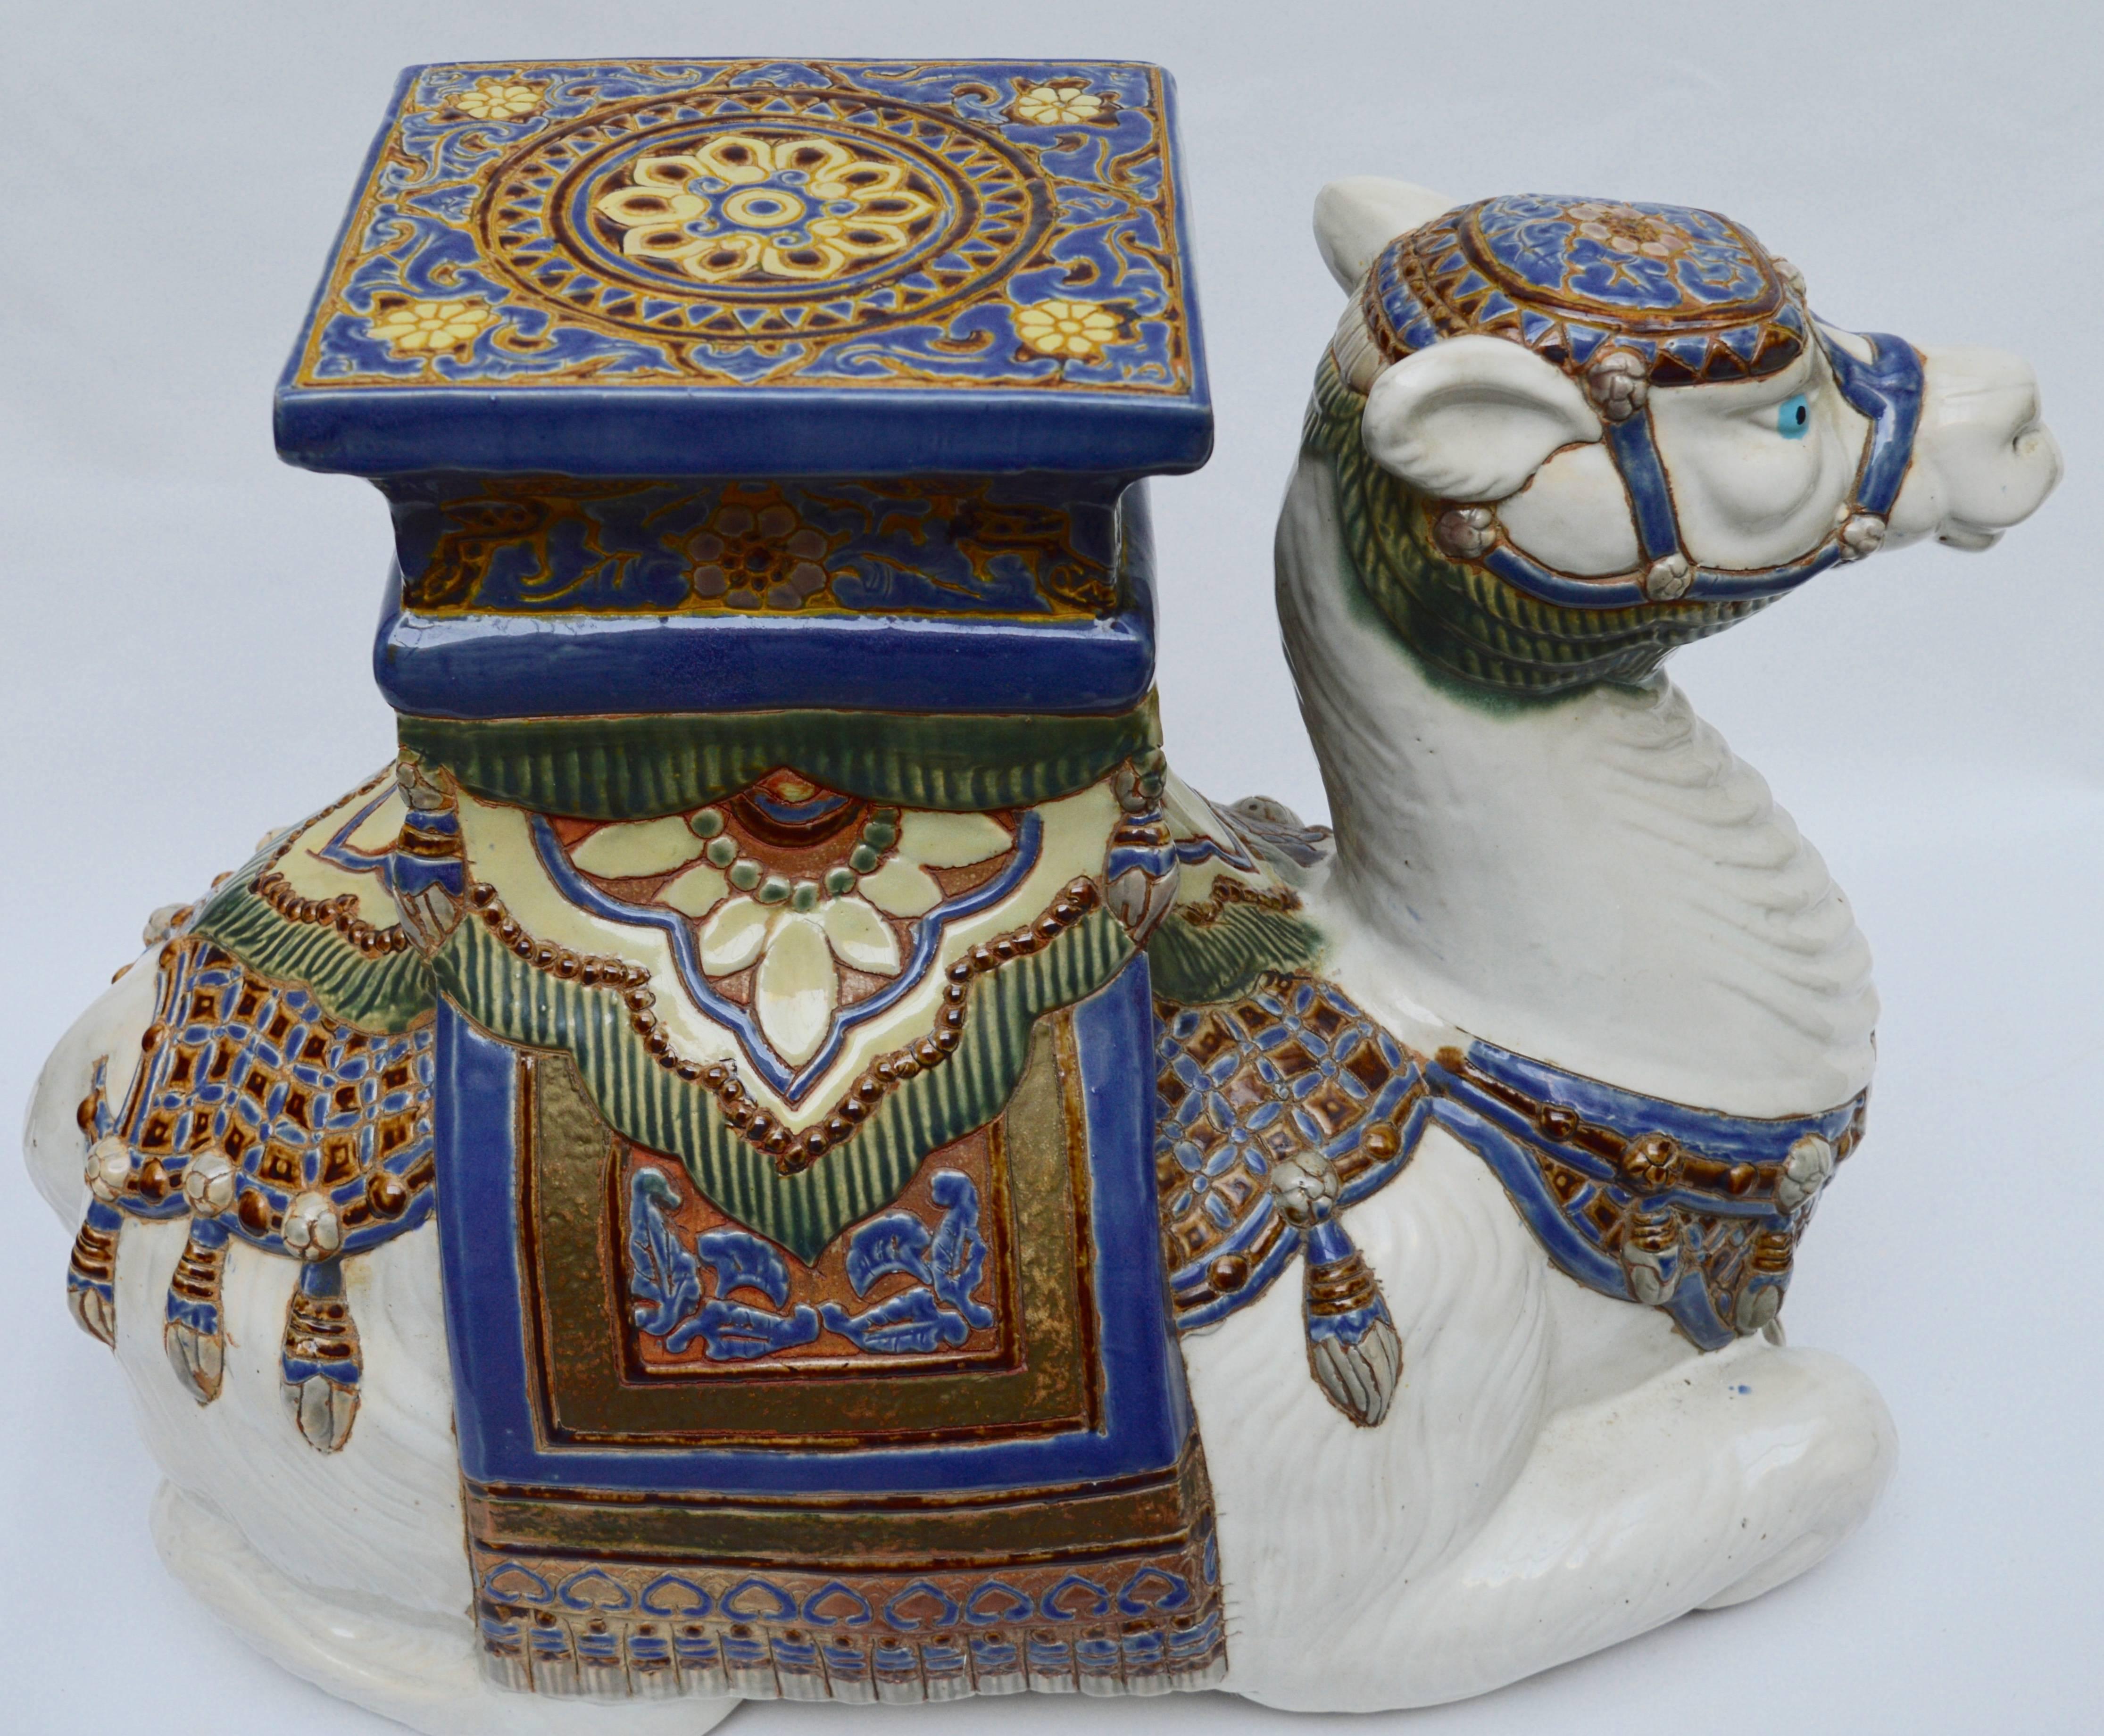 What a fun piece to add to the garden or living room! Glazed Italian ceramic camel was made to be used as a side table, garden seat or a plant pedestal.
Rare to find in such excellent condition!!